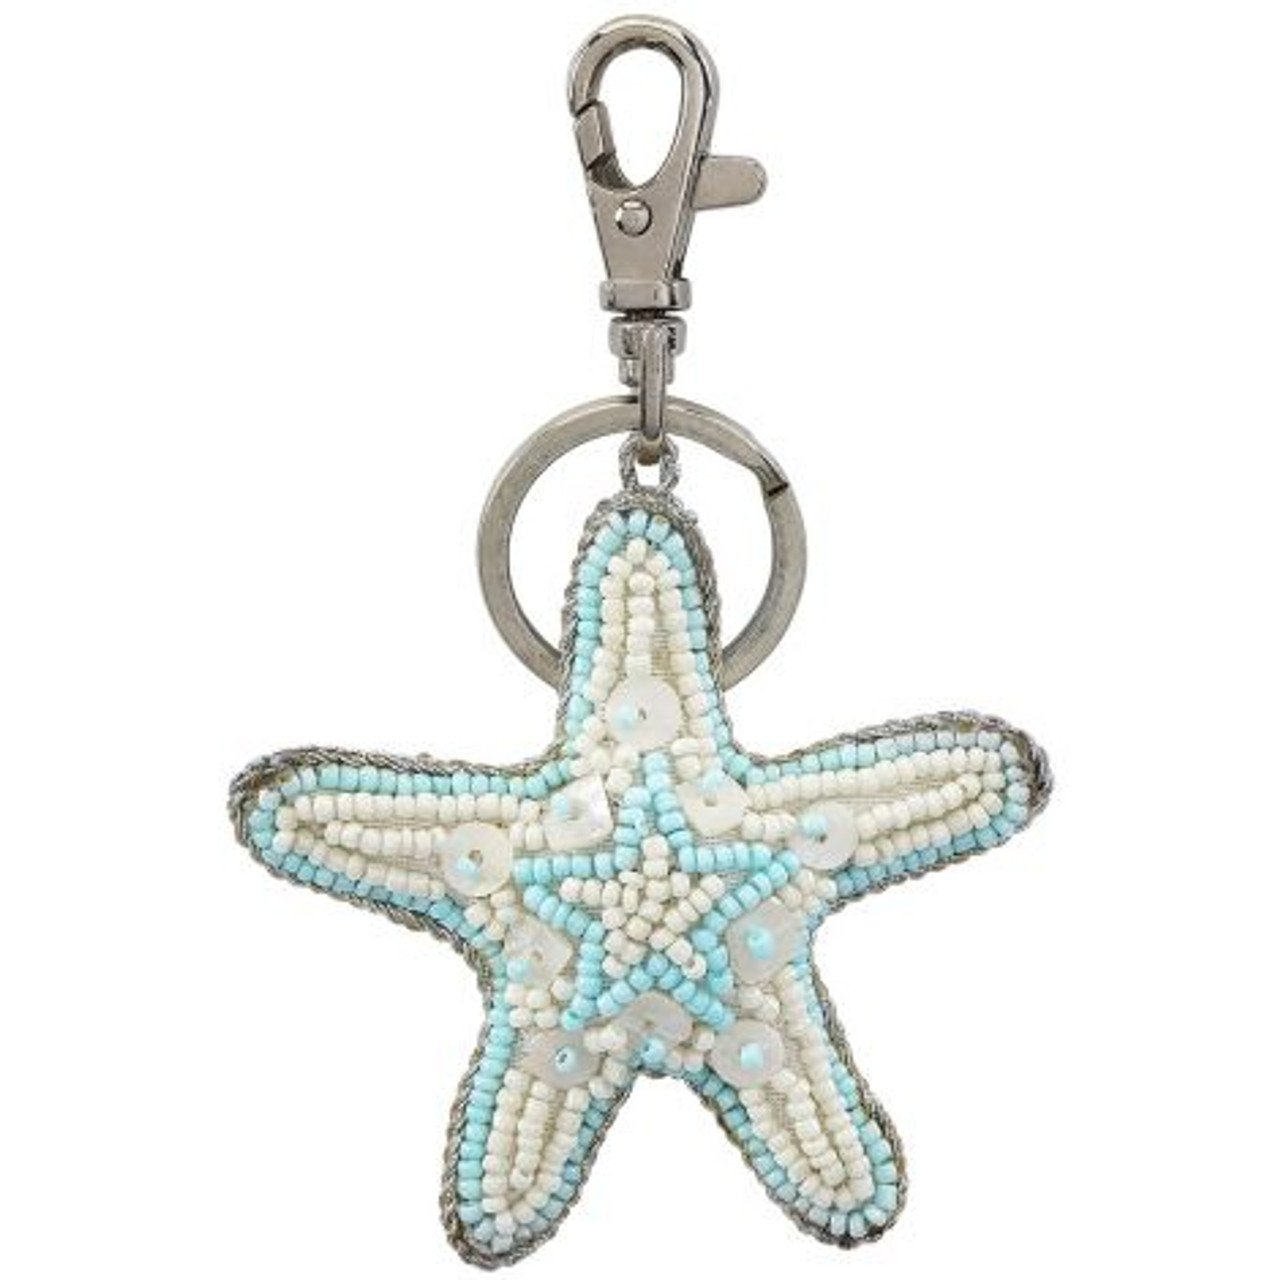 Blue Starfish Key Ring - Mother of Pearl & Beads - 3" - Front